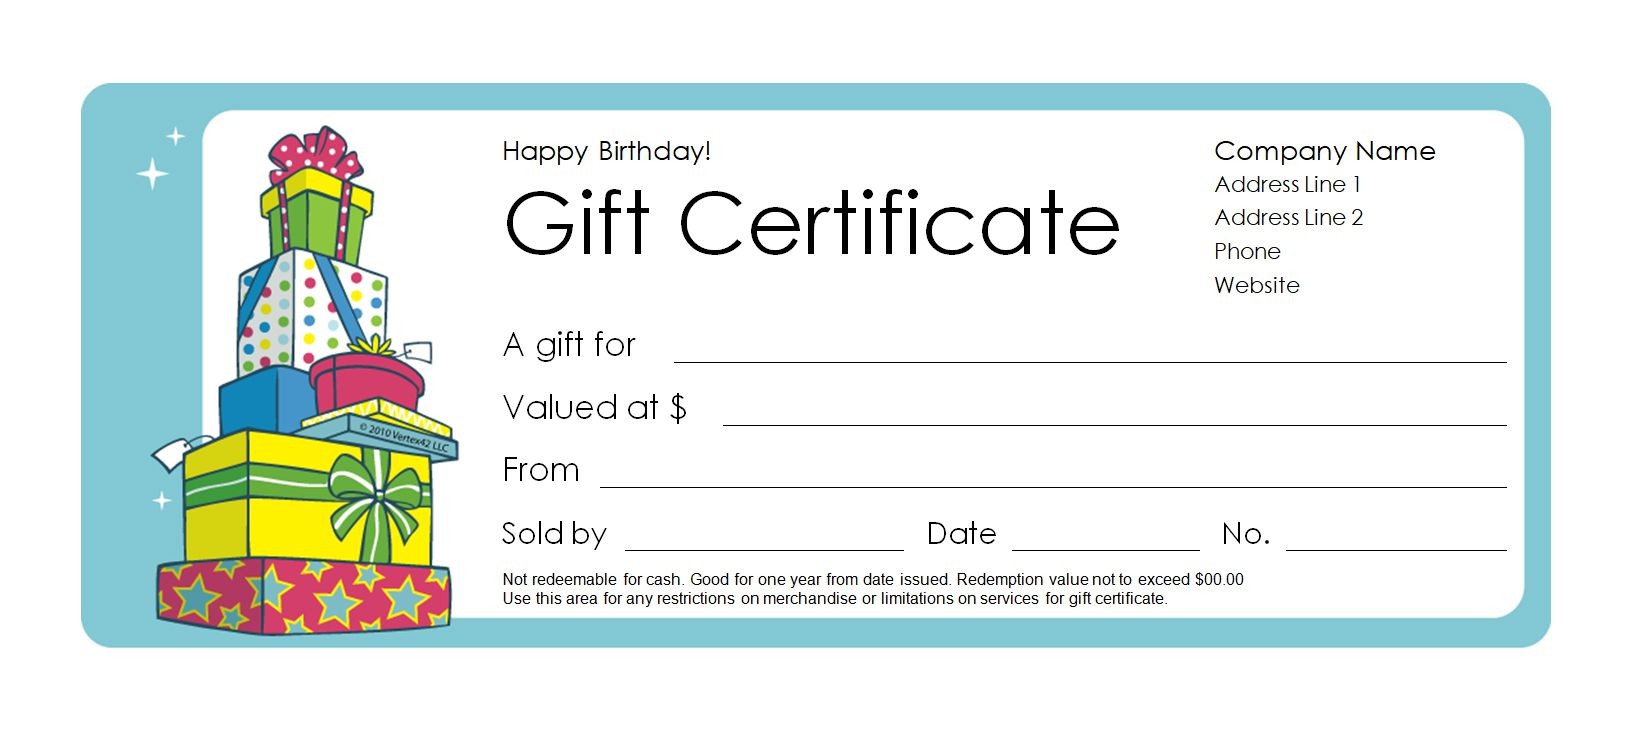 173 Free Gift Certificate Templates You Can Customize Fake Money Template